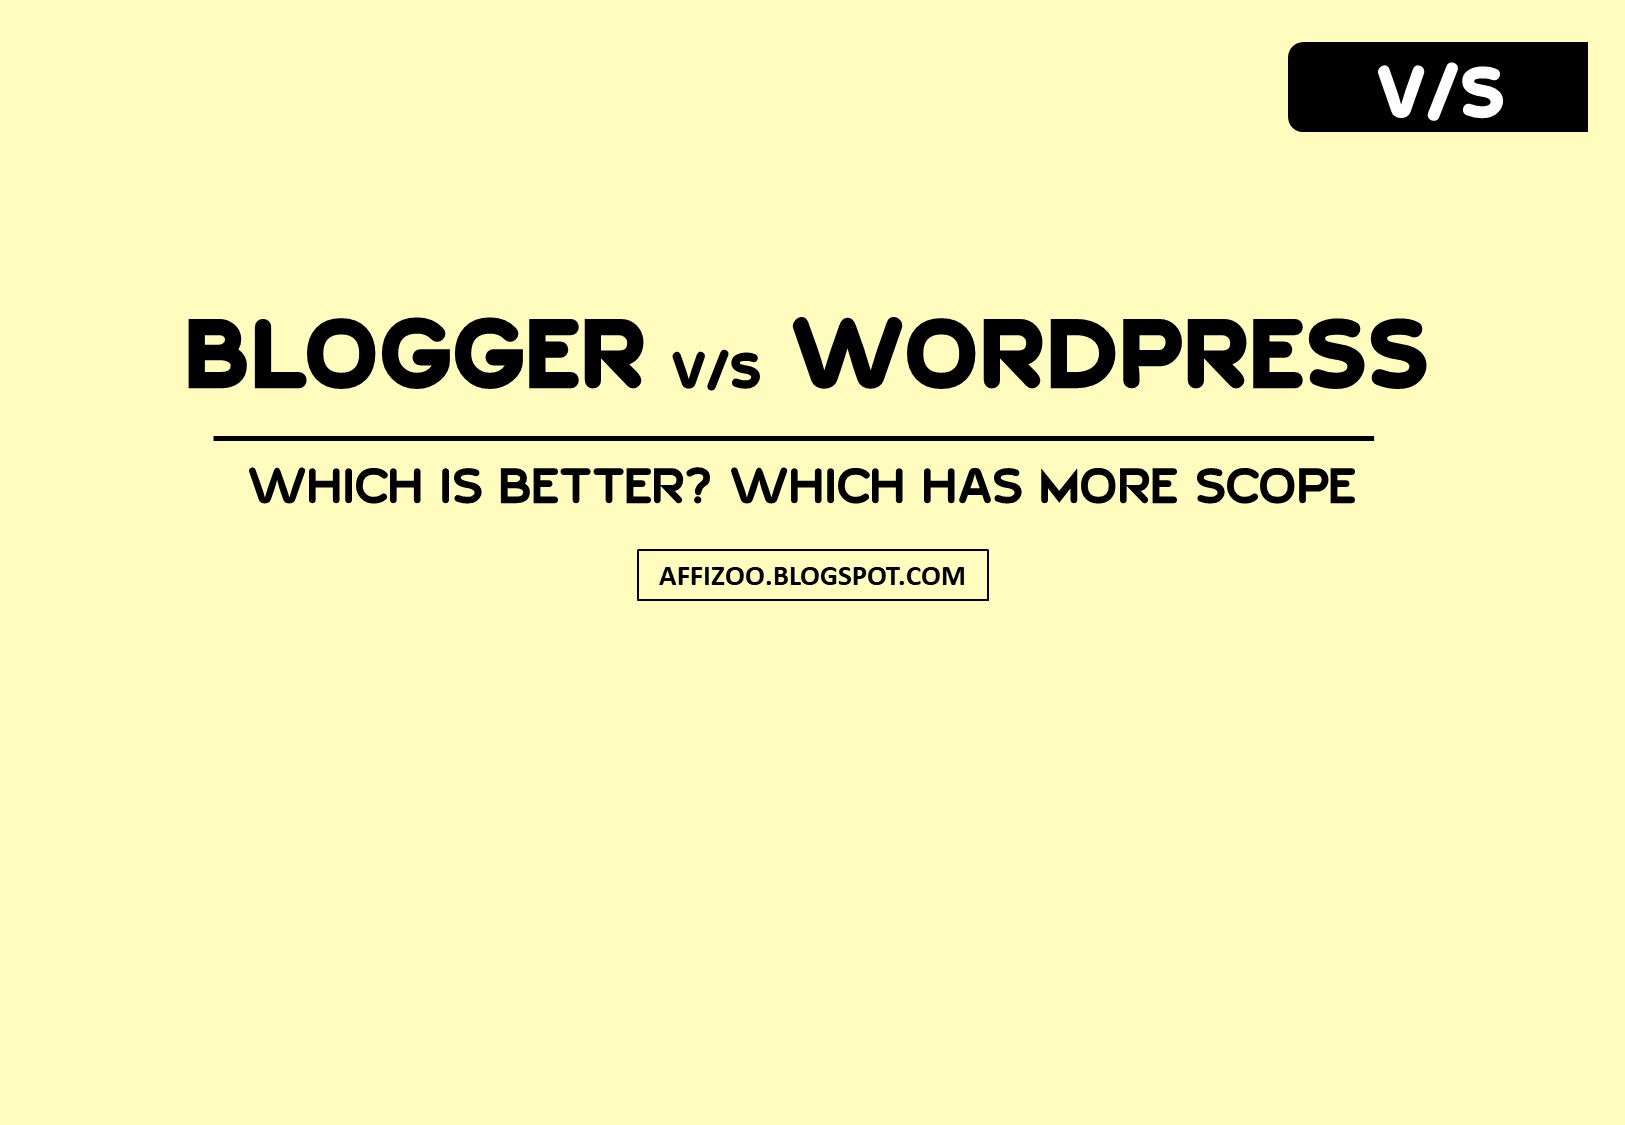 Blogger Vs WordPress - Which Is Better & Why? Detailed Reporting With Pros & Cons